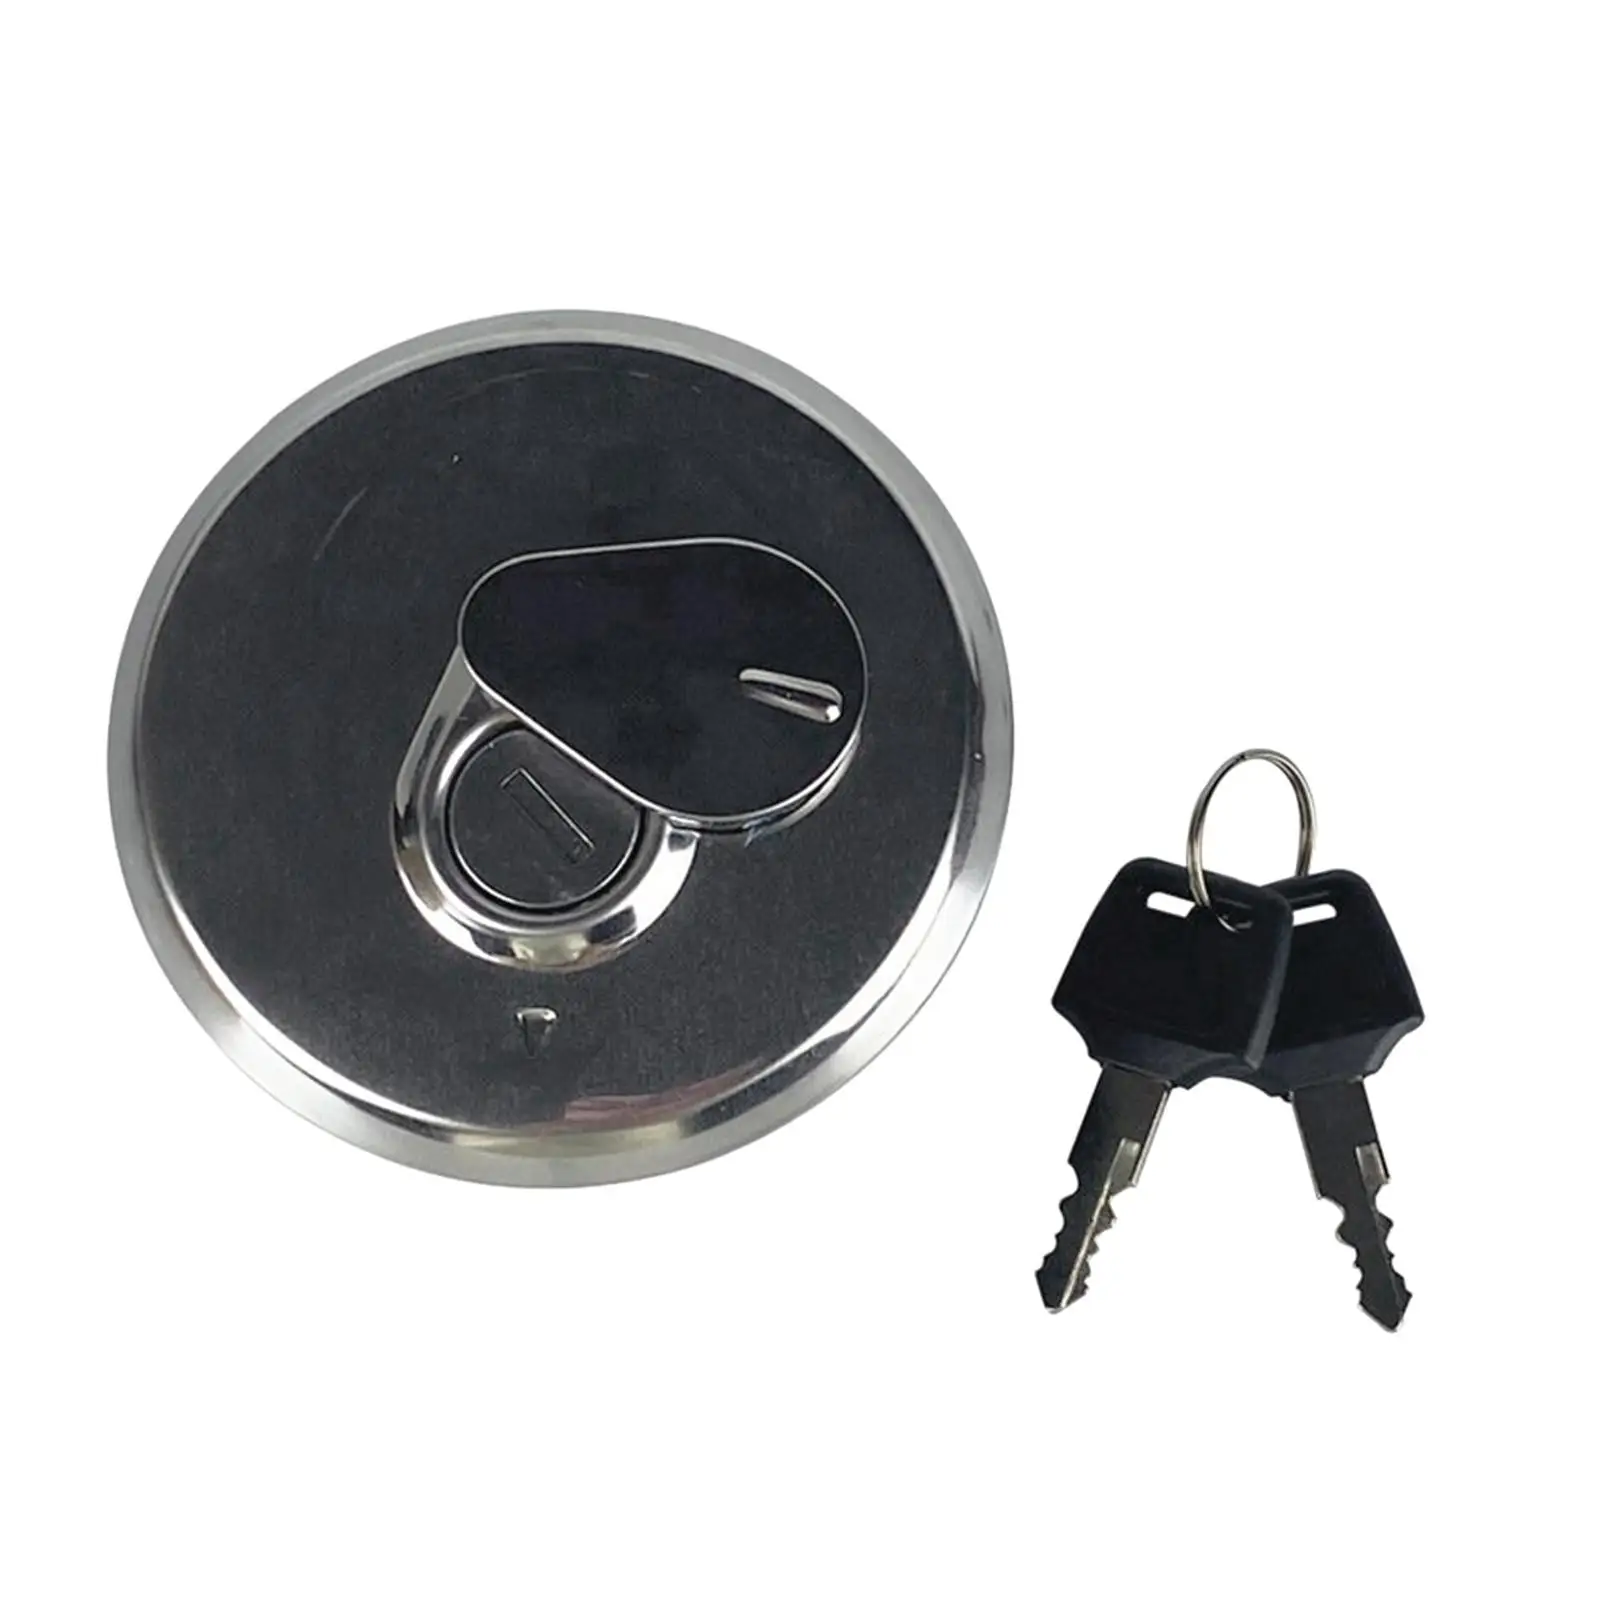 CNC Aluminum Motorbike Fuel Gas Tank Cap Cover, with Lock Keys Direct Replaces for Suzuki Gn125